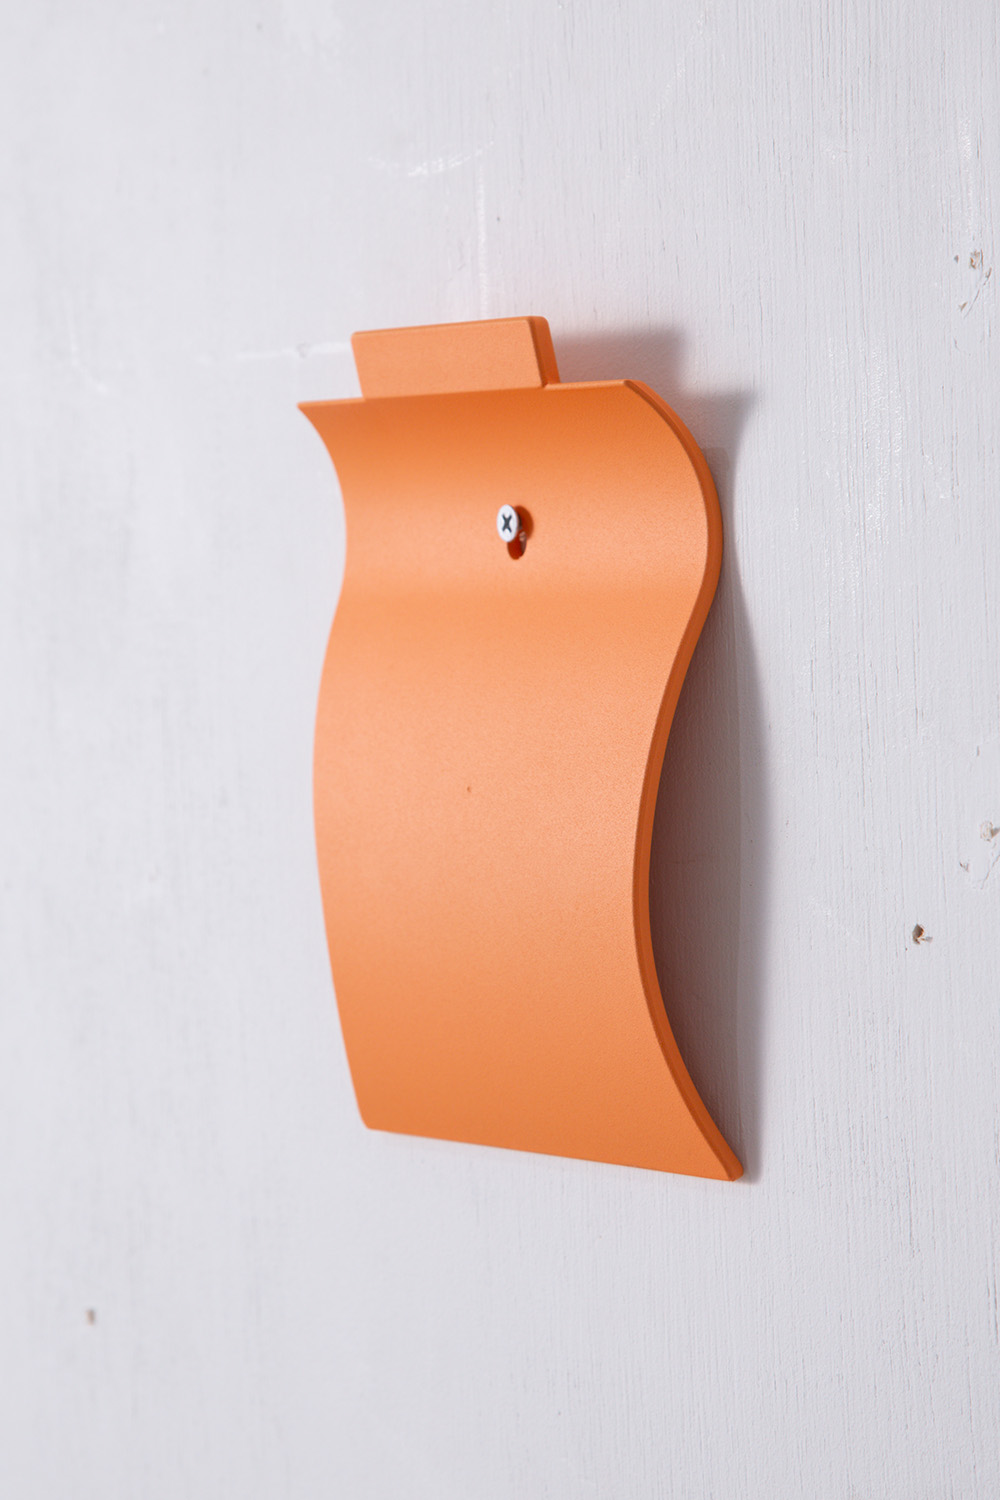 ‘RITRATTO’ Wall Flower Vase by Alessandro Mendini for MaruTomi in Green , Orange